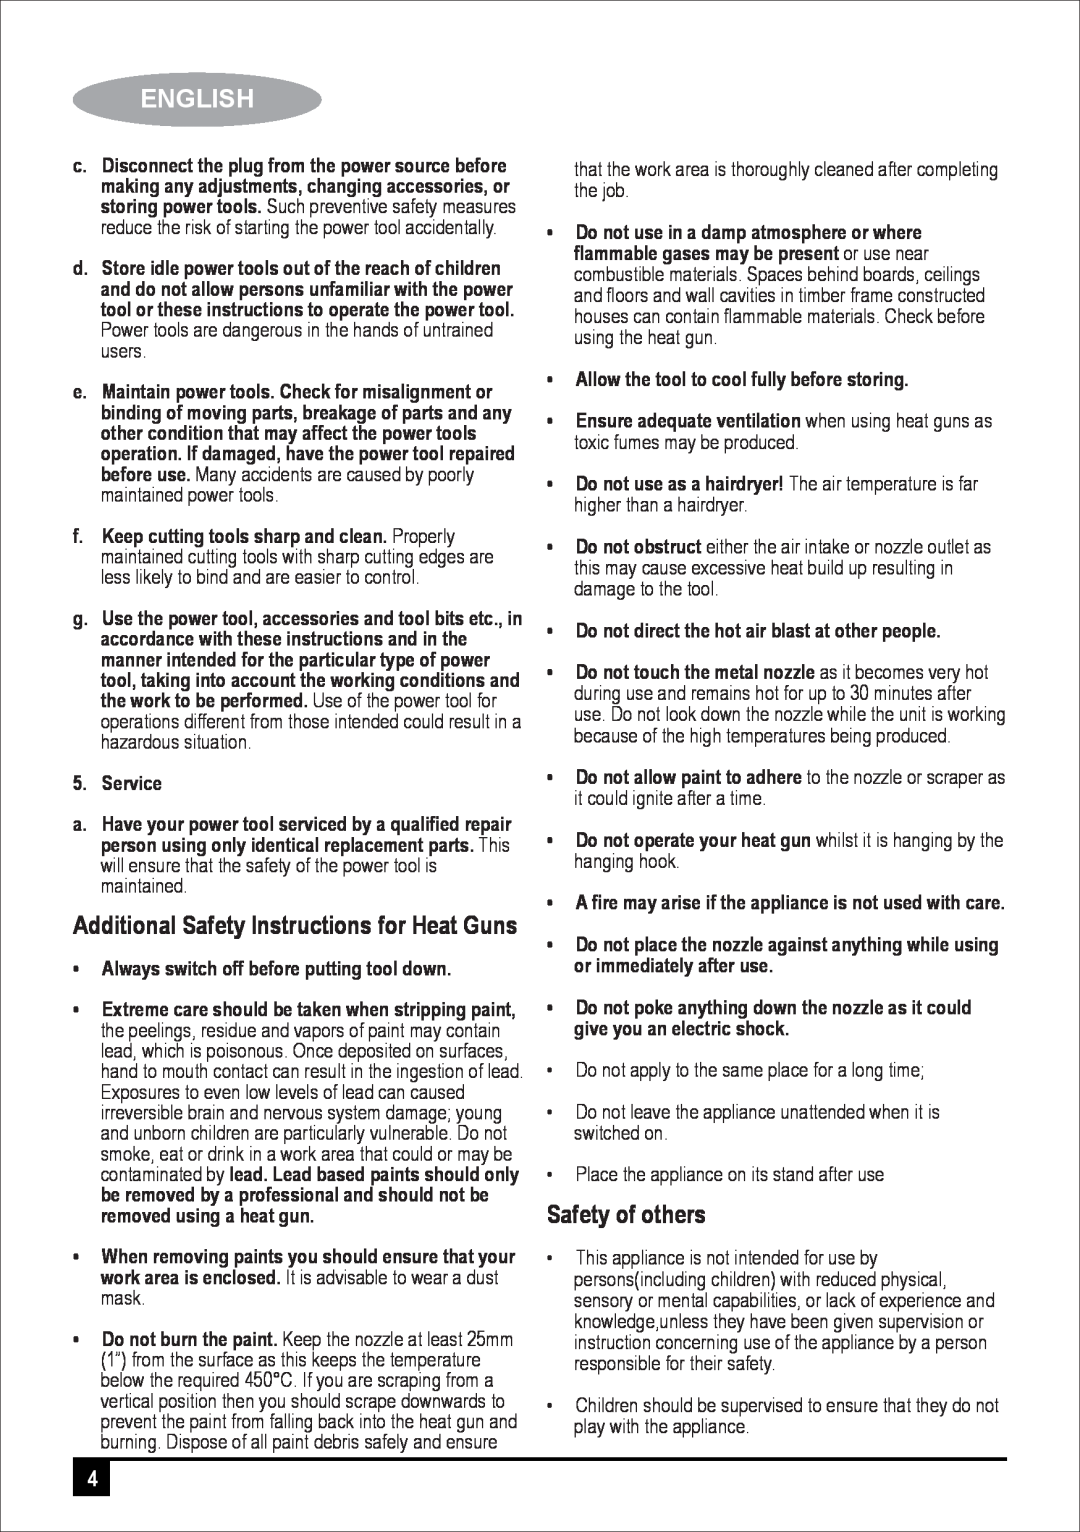 Black & Decker BPXH2000 manual Additional Safety Instructions for Heat Guns, Safety of others, English 